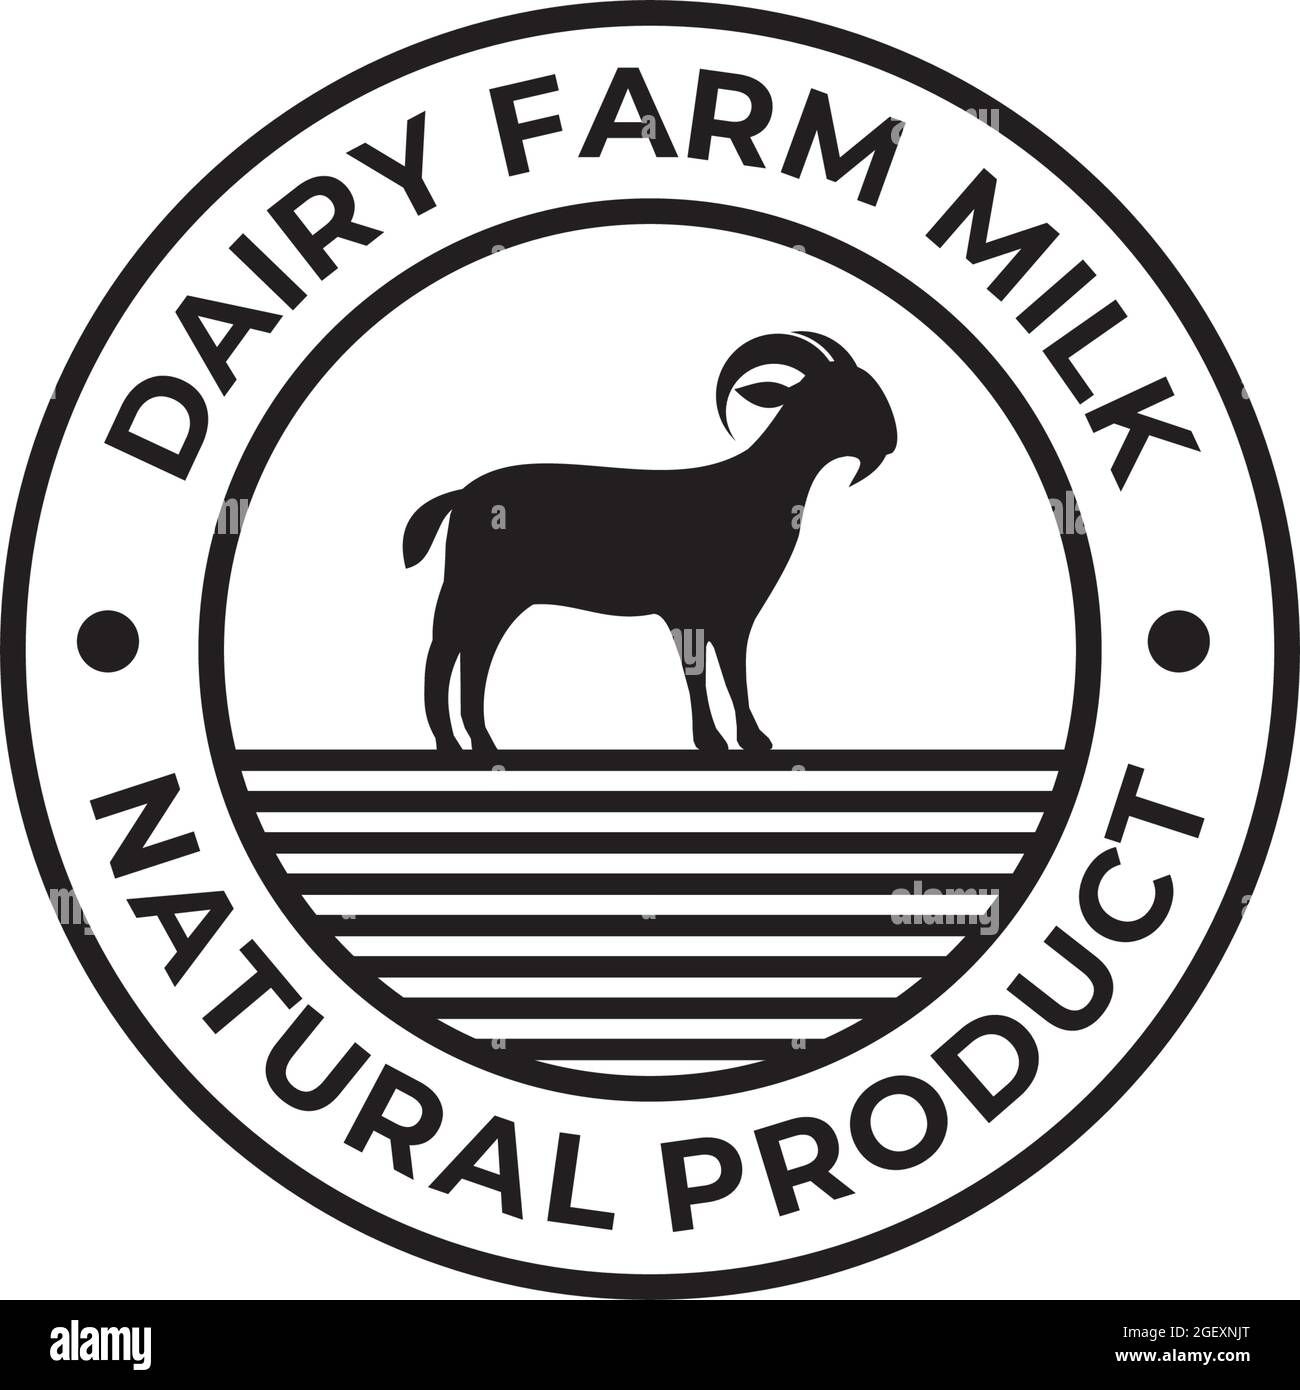 is sherp milk halal in the United States?